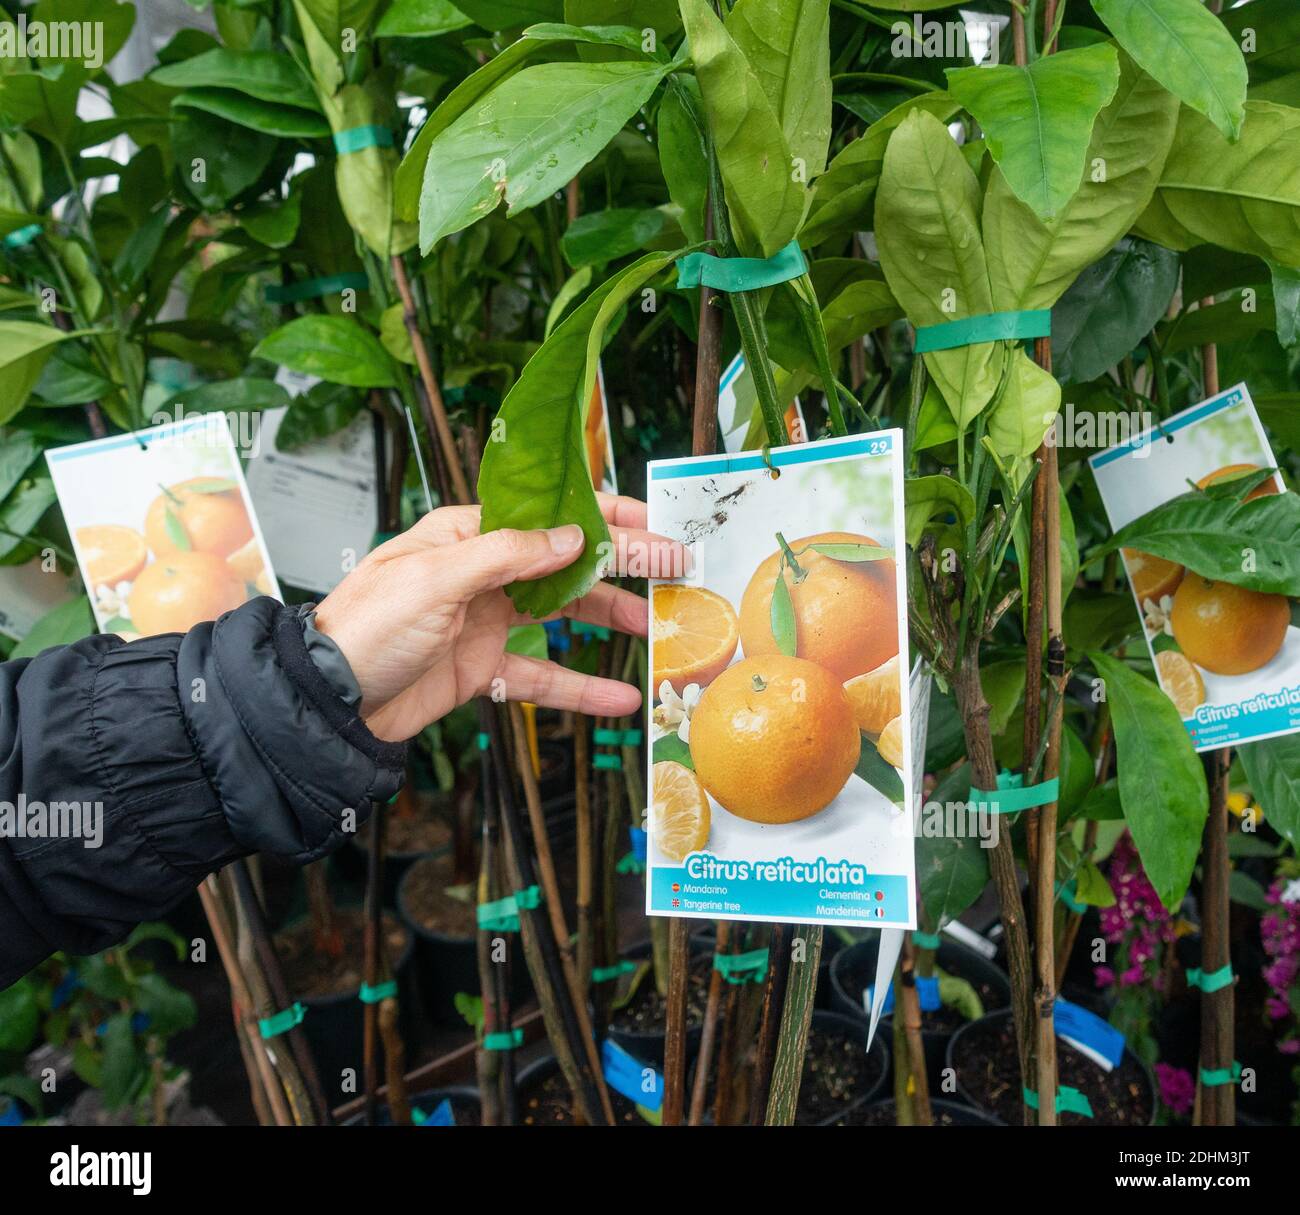 Woman wearing face covering looking at Citrus reticulata orange tree in Garden centre. Stock Photo